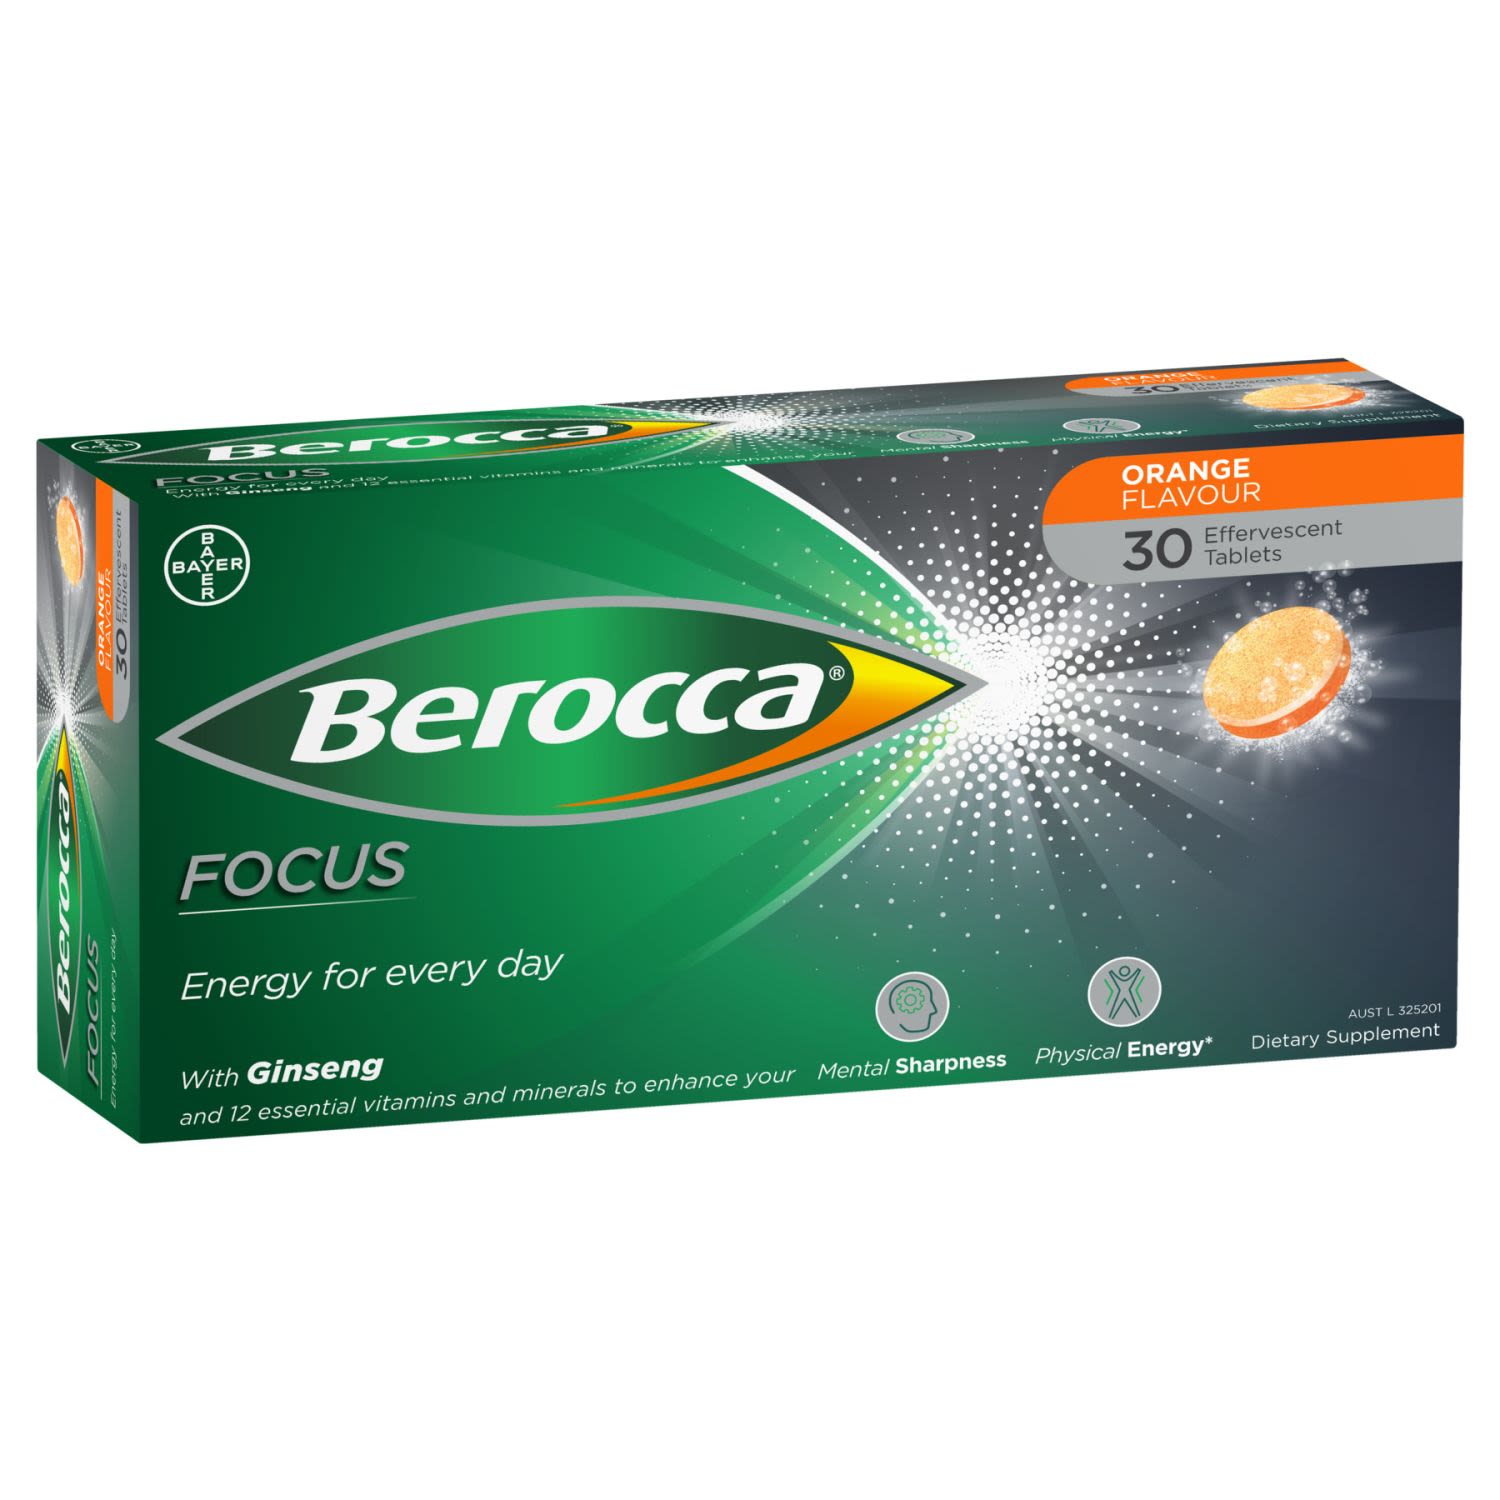 Berocca Focus Vitamin B & C Orange Flavour With Ginseng Energy Effervescent Tablets, 30 Each